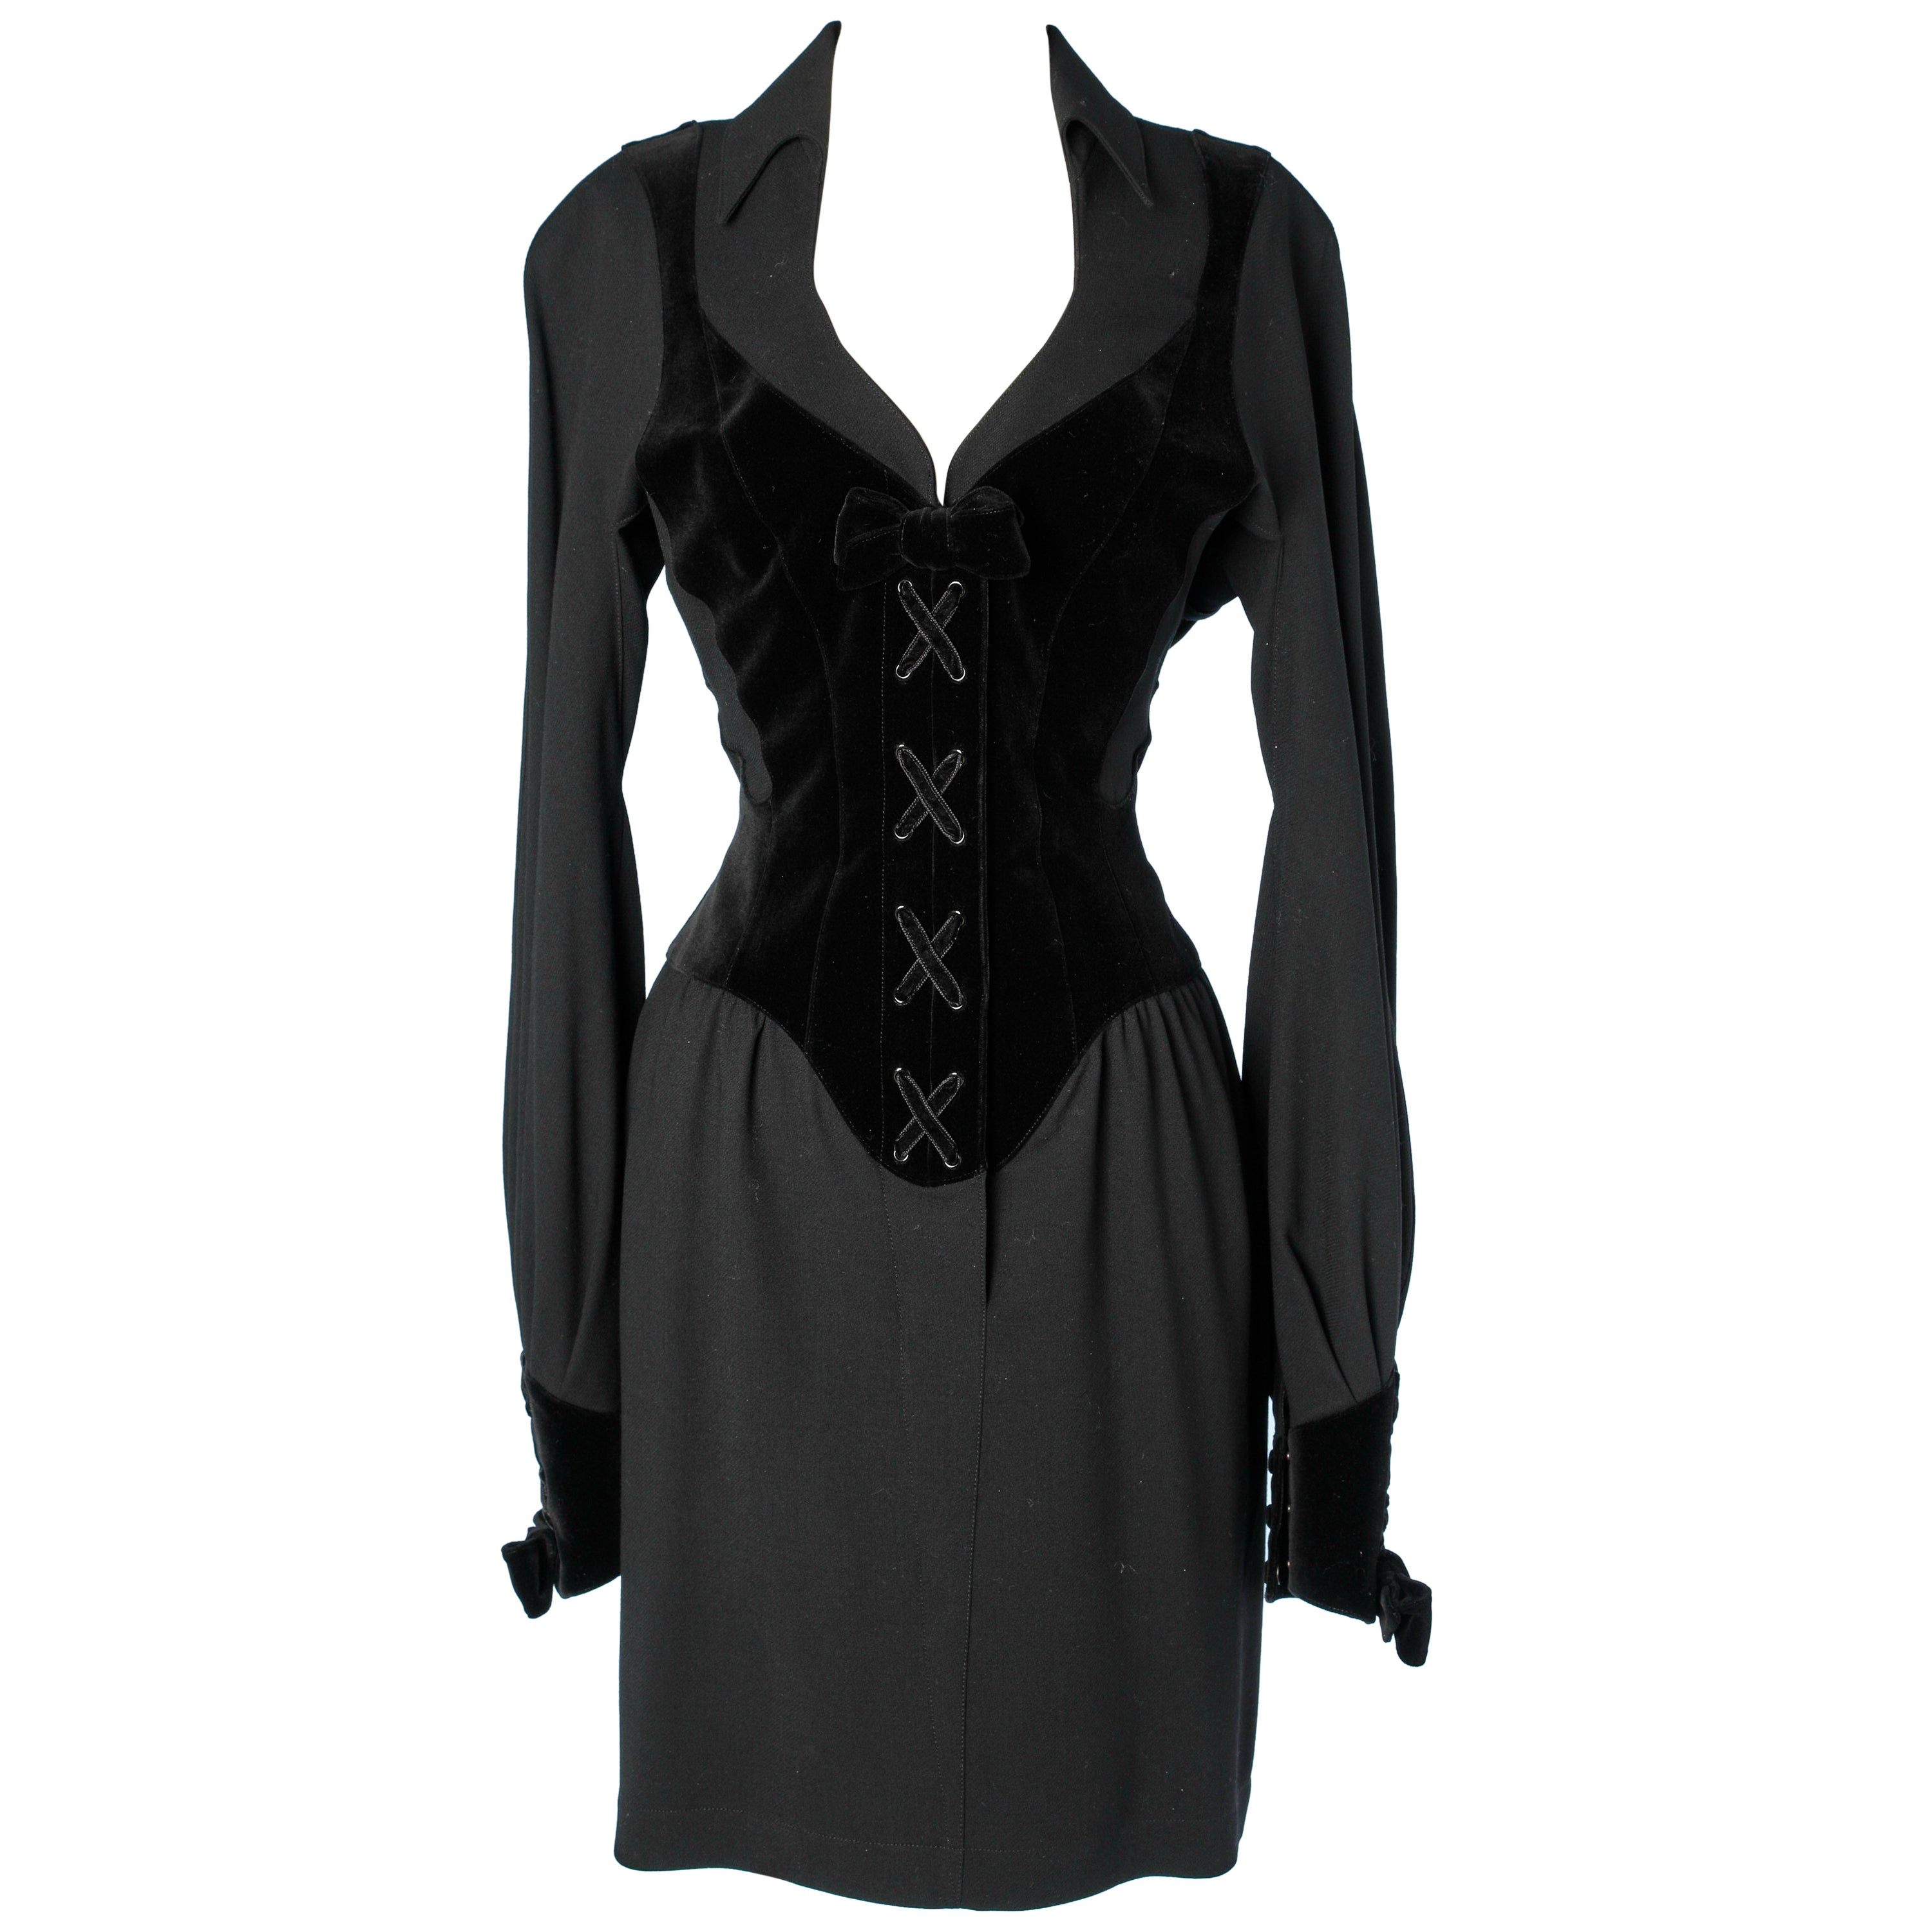 Black laced dress with press studs Thierry Mugler 